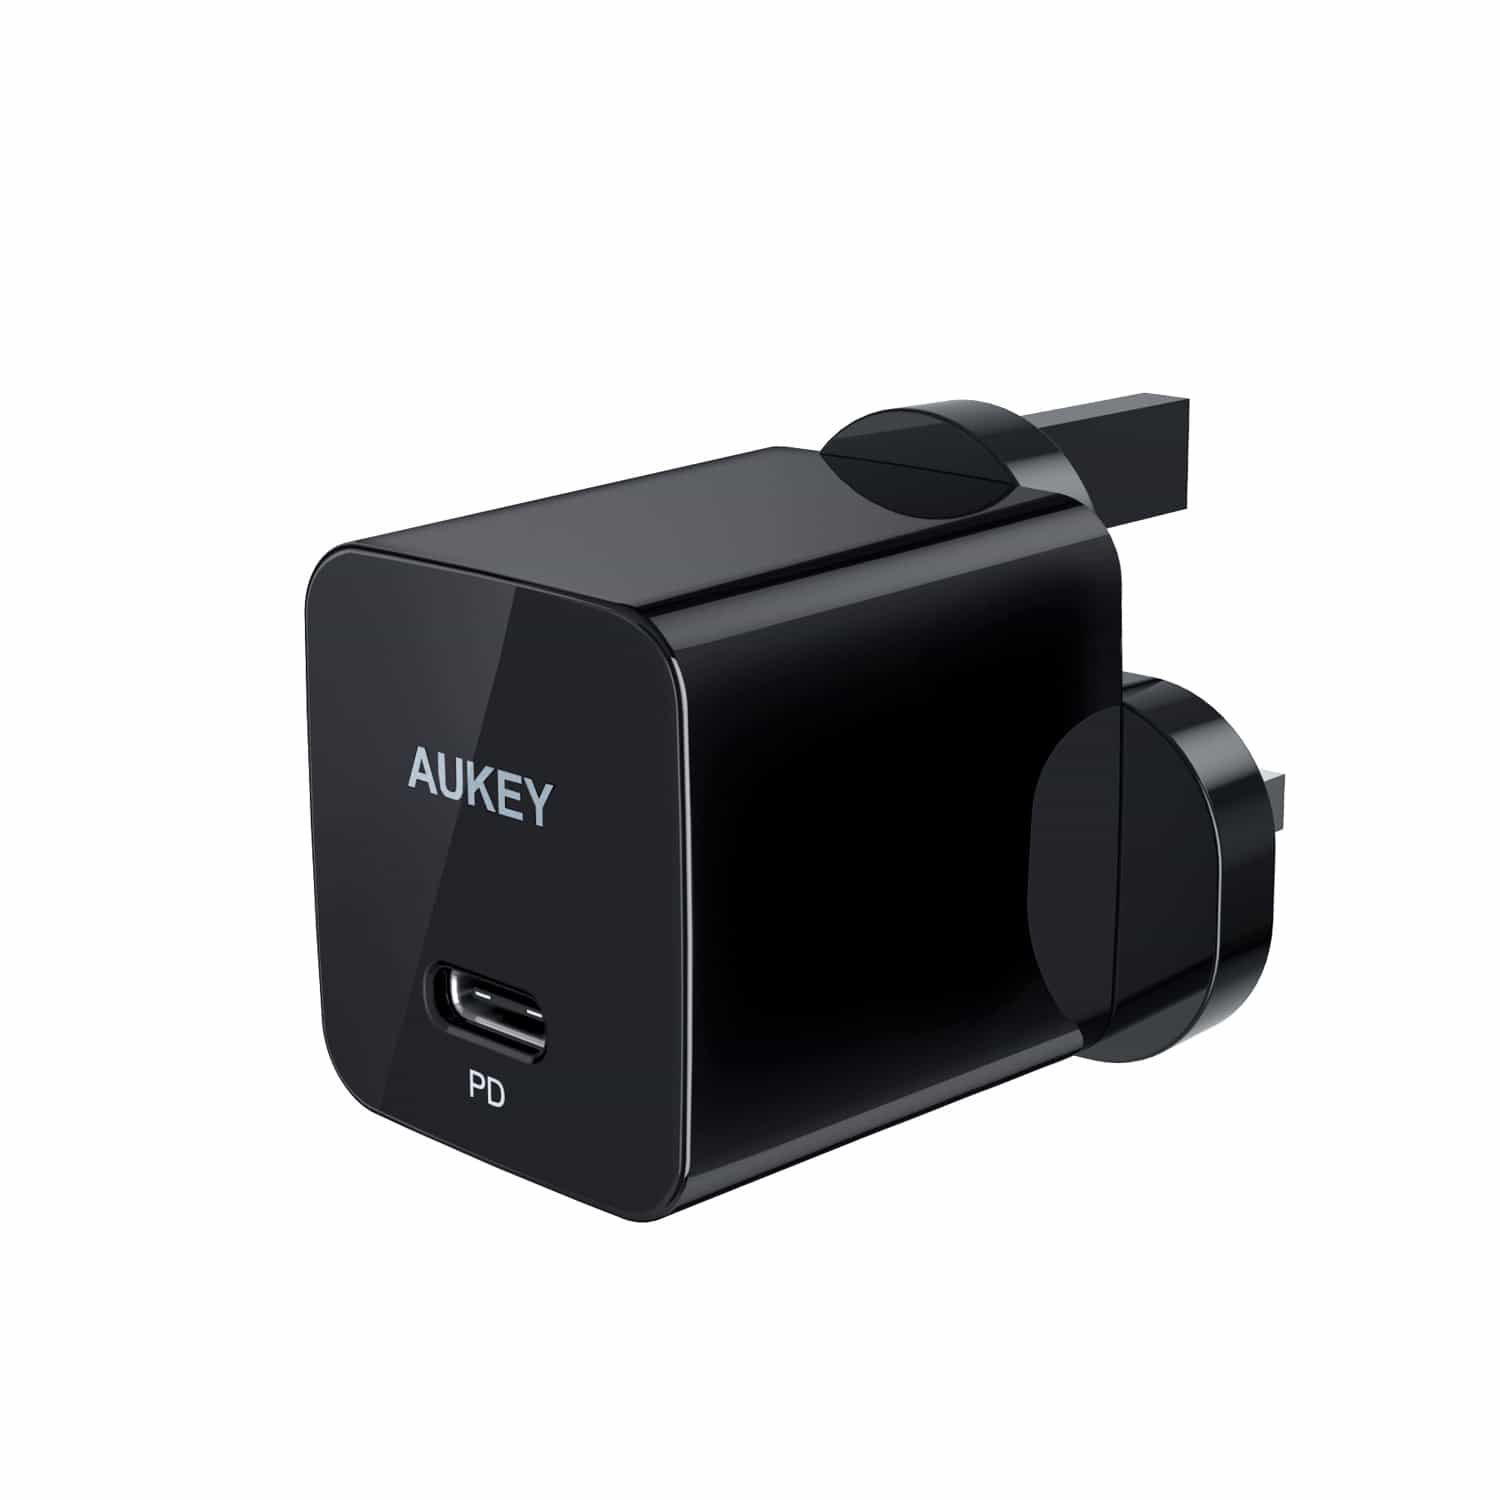 Projecteur LCD Aukey RD-870S sans fil Android 1080p - www